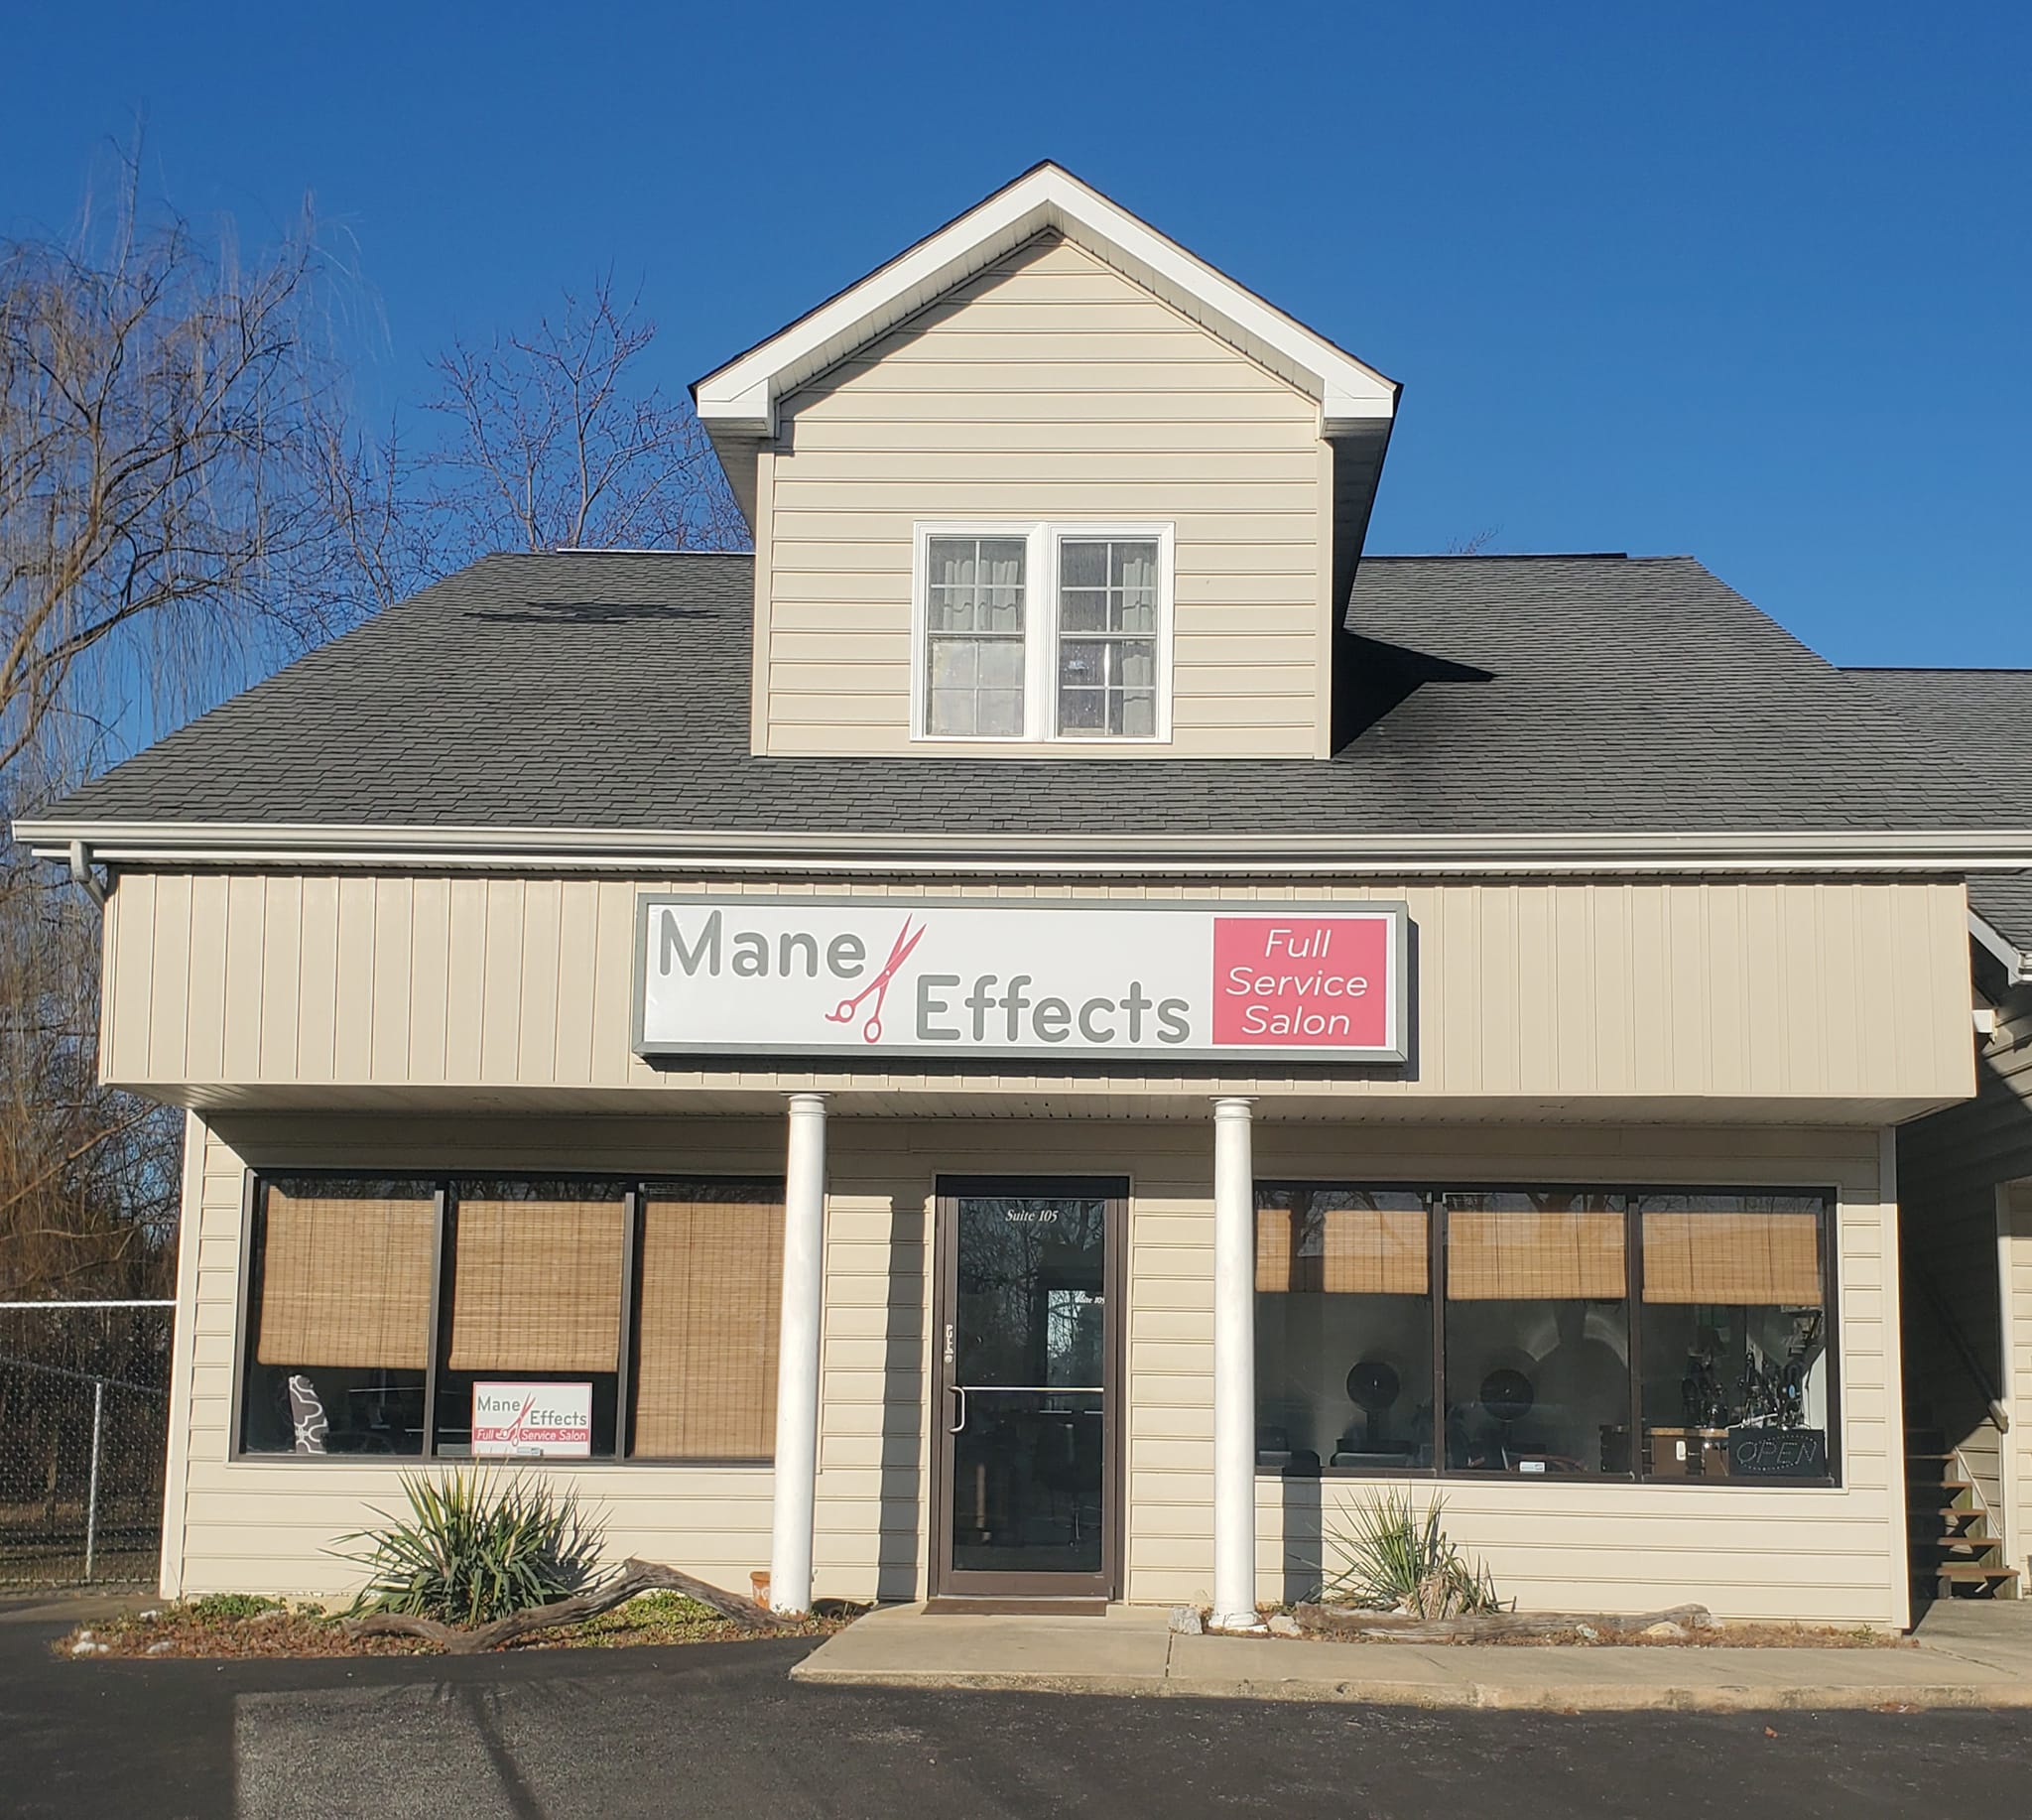 Mane Effects 1810 Main St, Chester Maryland 21619